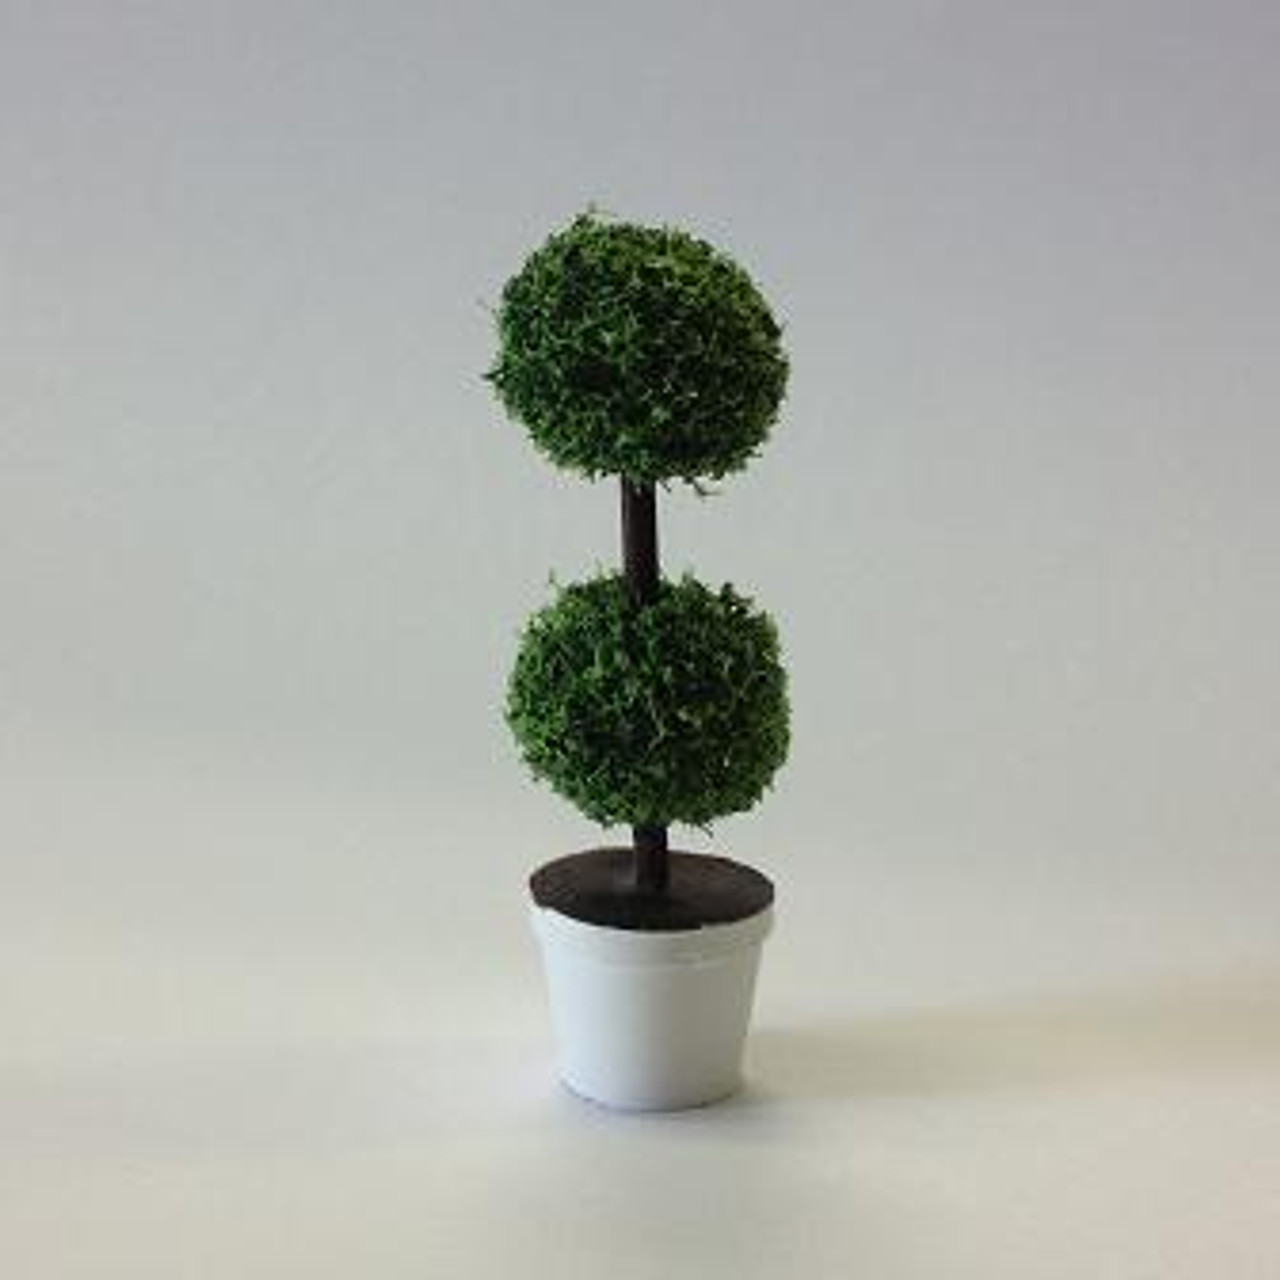 Half scale topiary that can easily be adapted to one-inch (1:12) scale use.